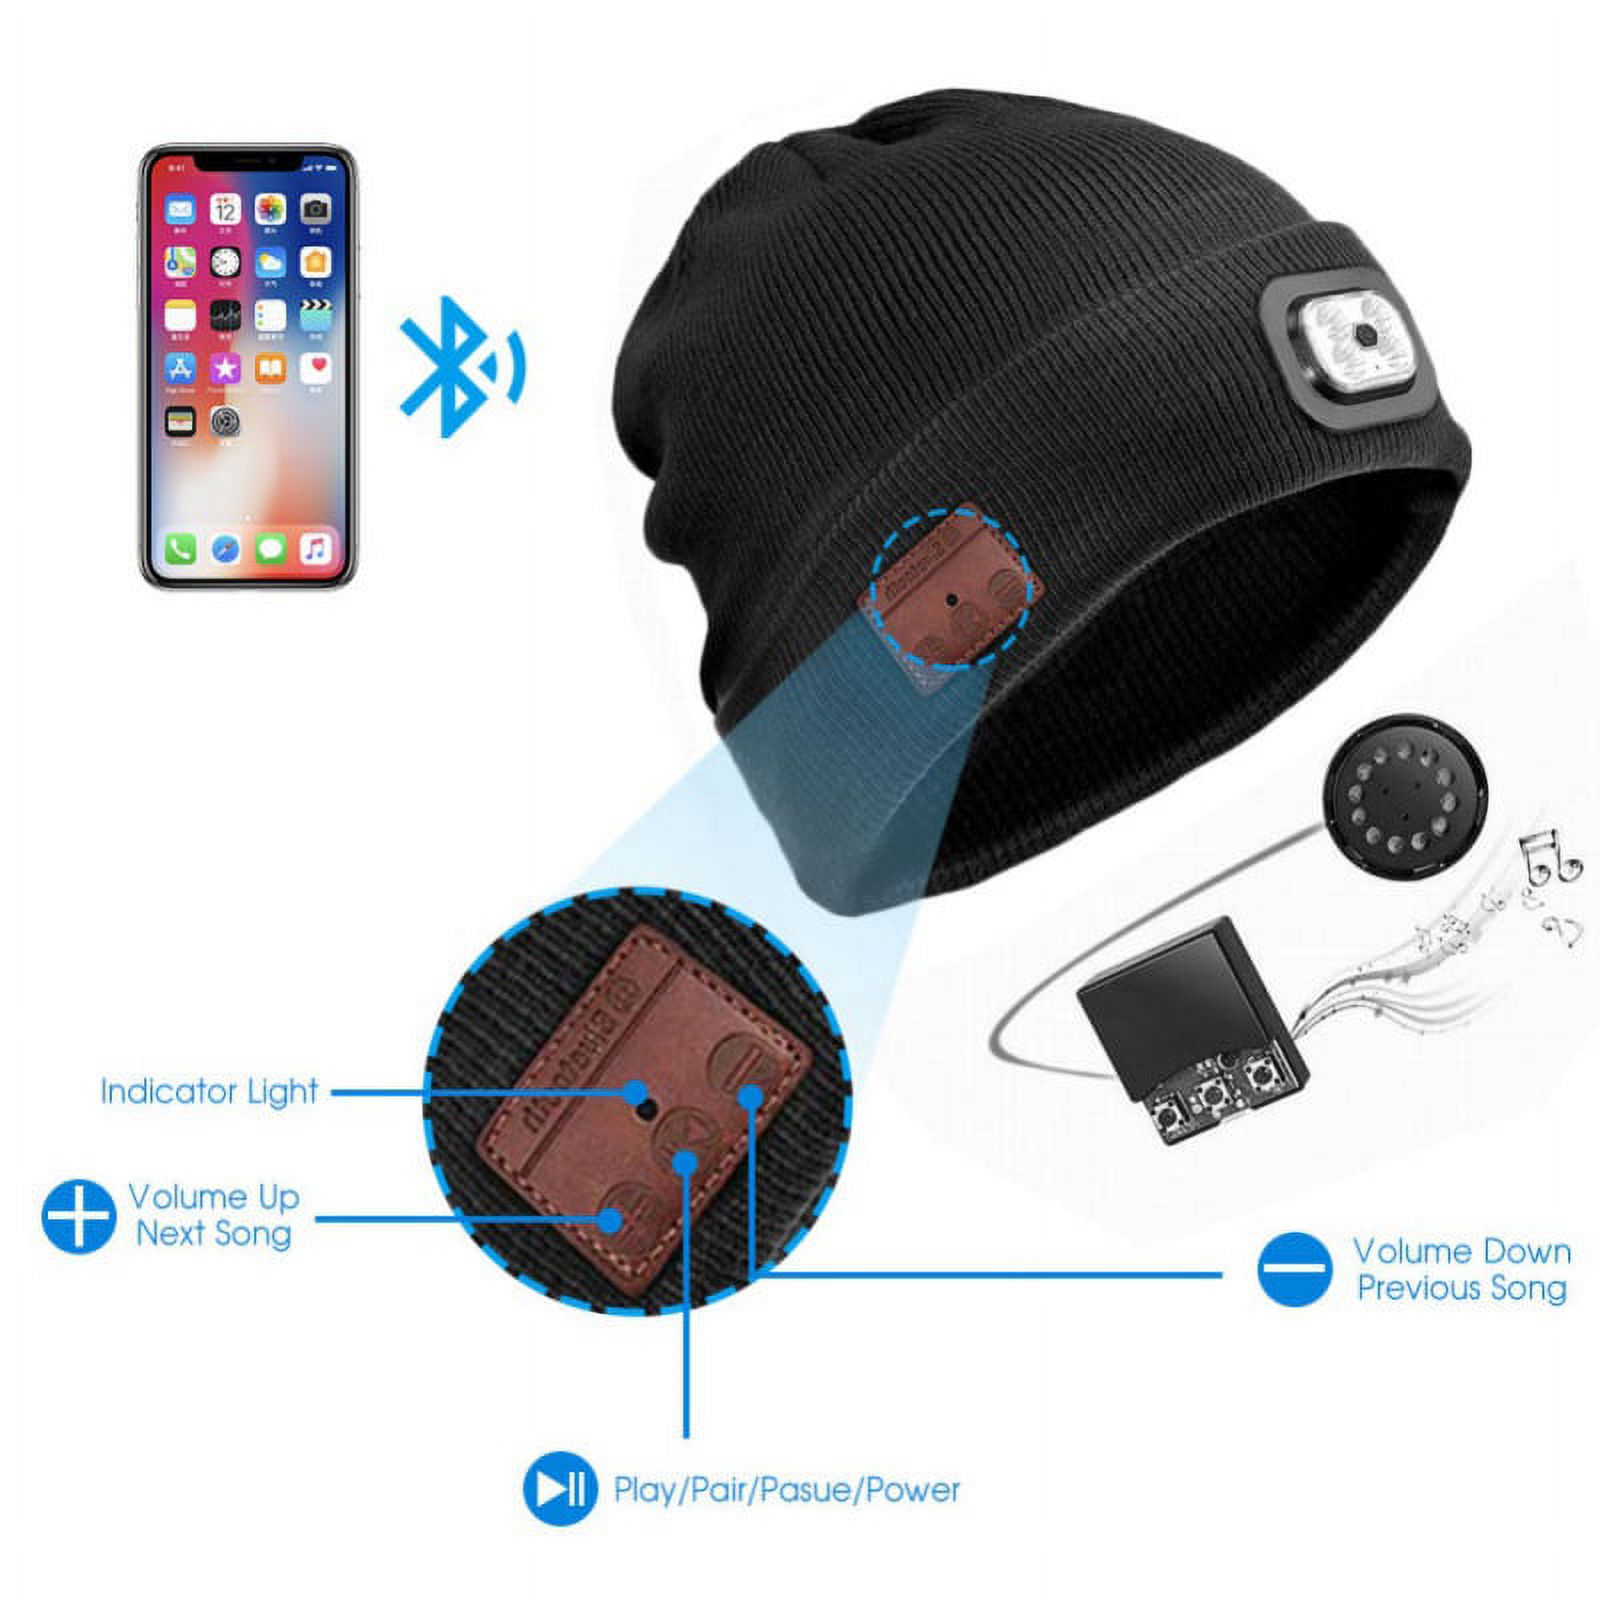 Poseca Bluetooth Beanie Hat LED Beanie Hat, Unisex Wireless Headphone Beanie USB Rechargeable Lighted Cap with Built-in HD Stereo Speakers & Mic - image 2 of 7